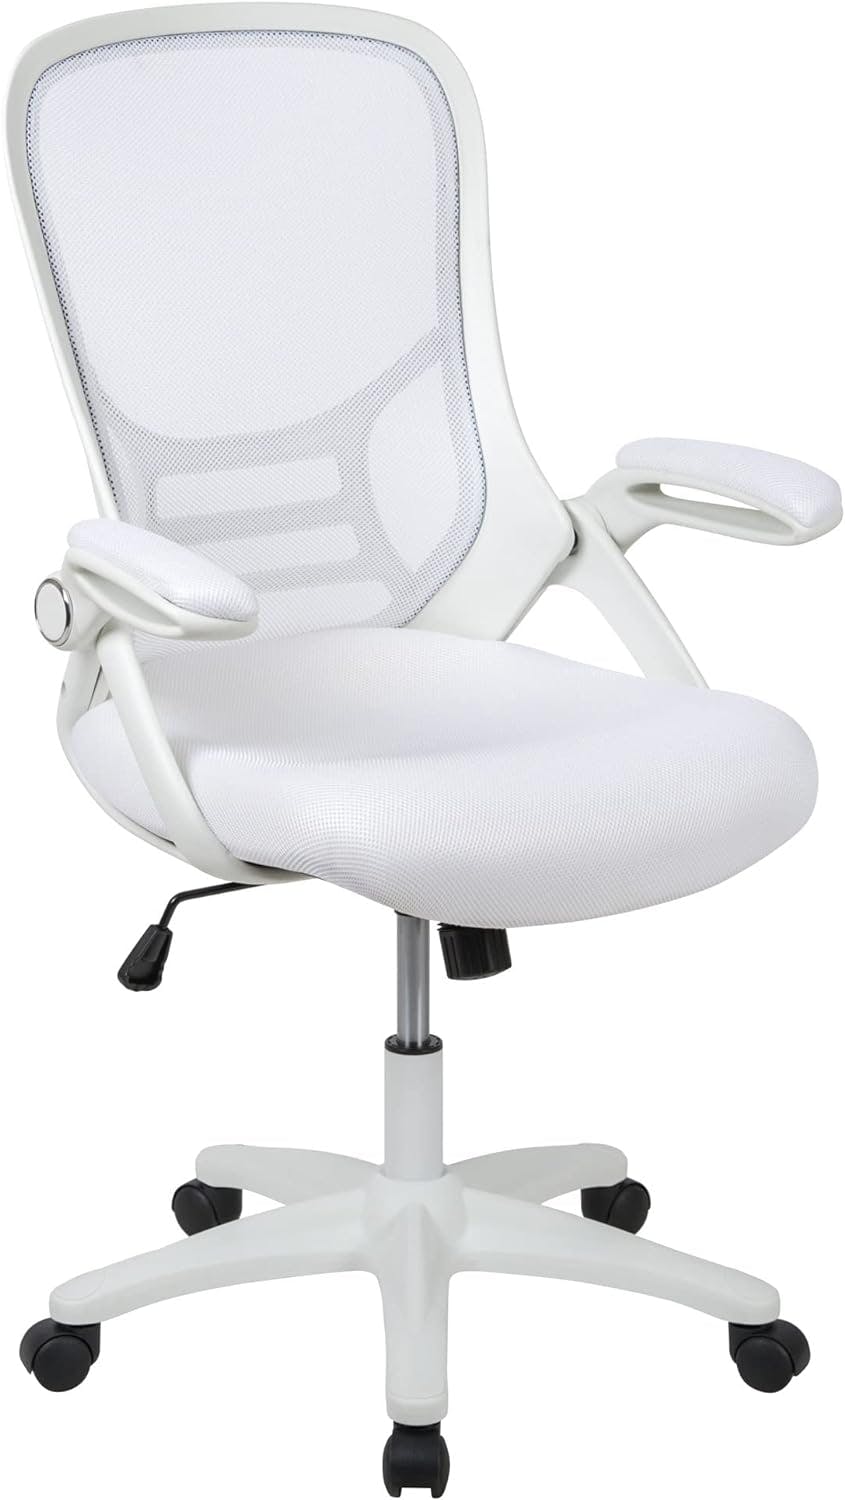 White High-Back Ergonomic Mesh Swivel Office Chair with Adjustable Arms